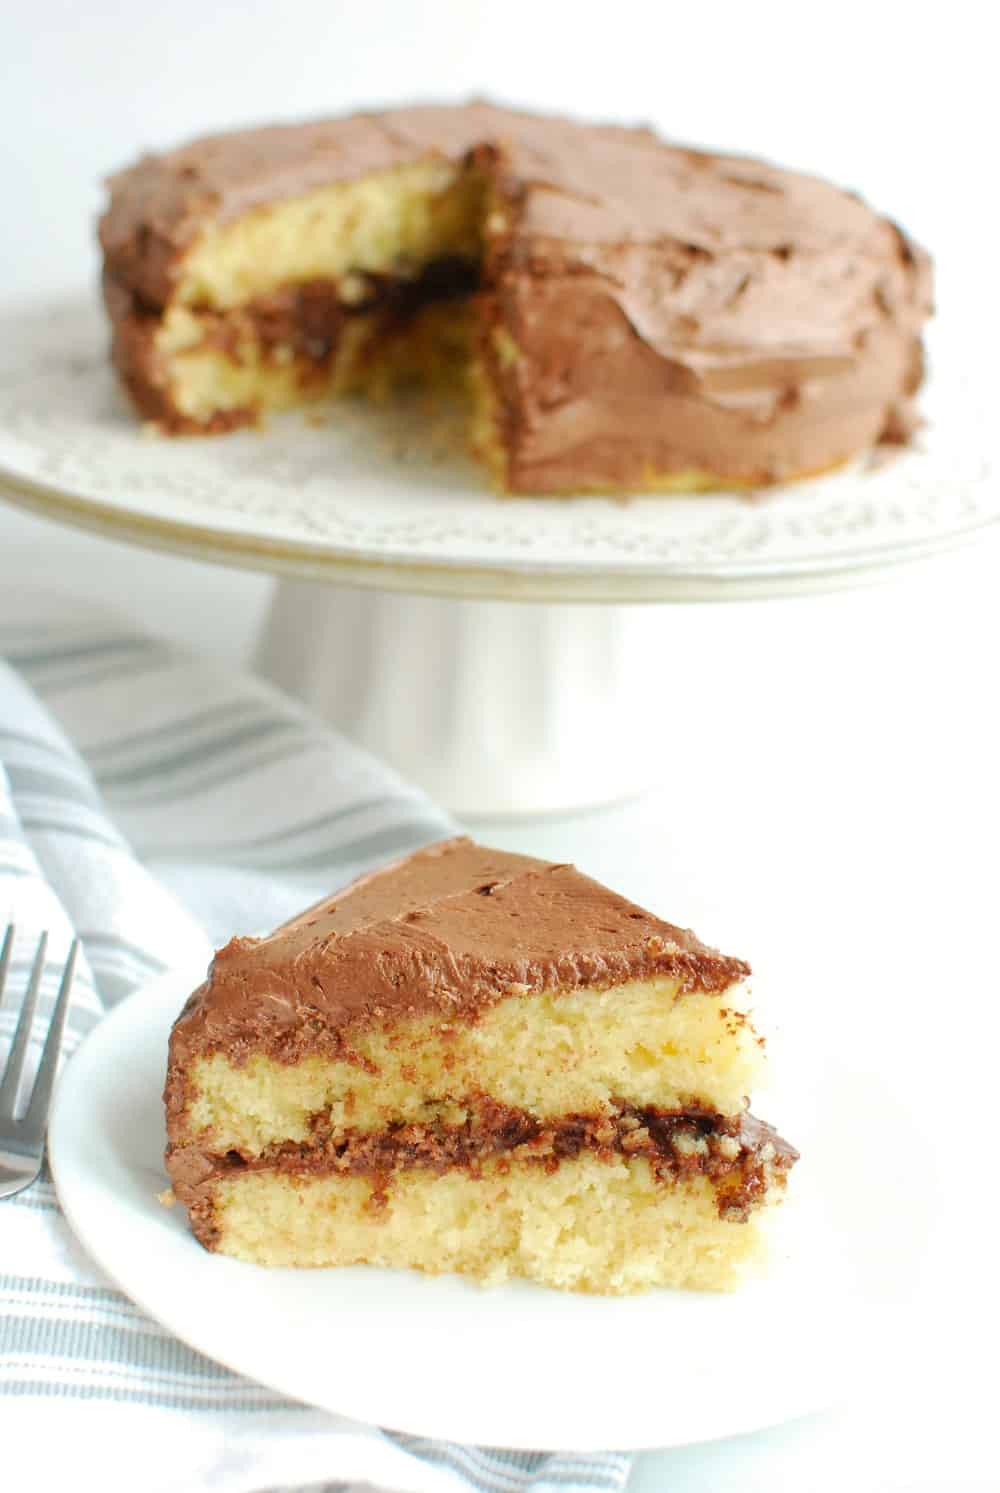 A slice of dairy free yellow cake with chocolate frosting on a white plate, next to a platter with the rest of the cake.